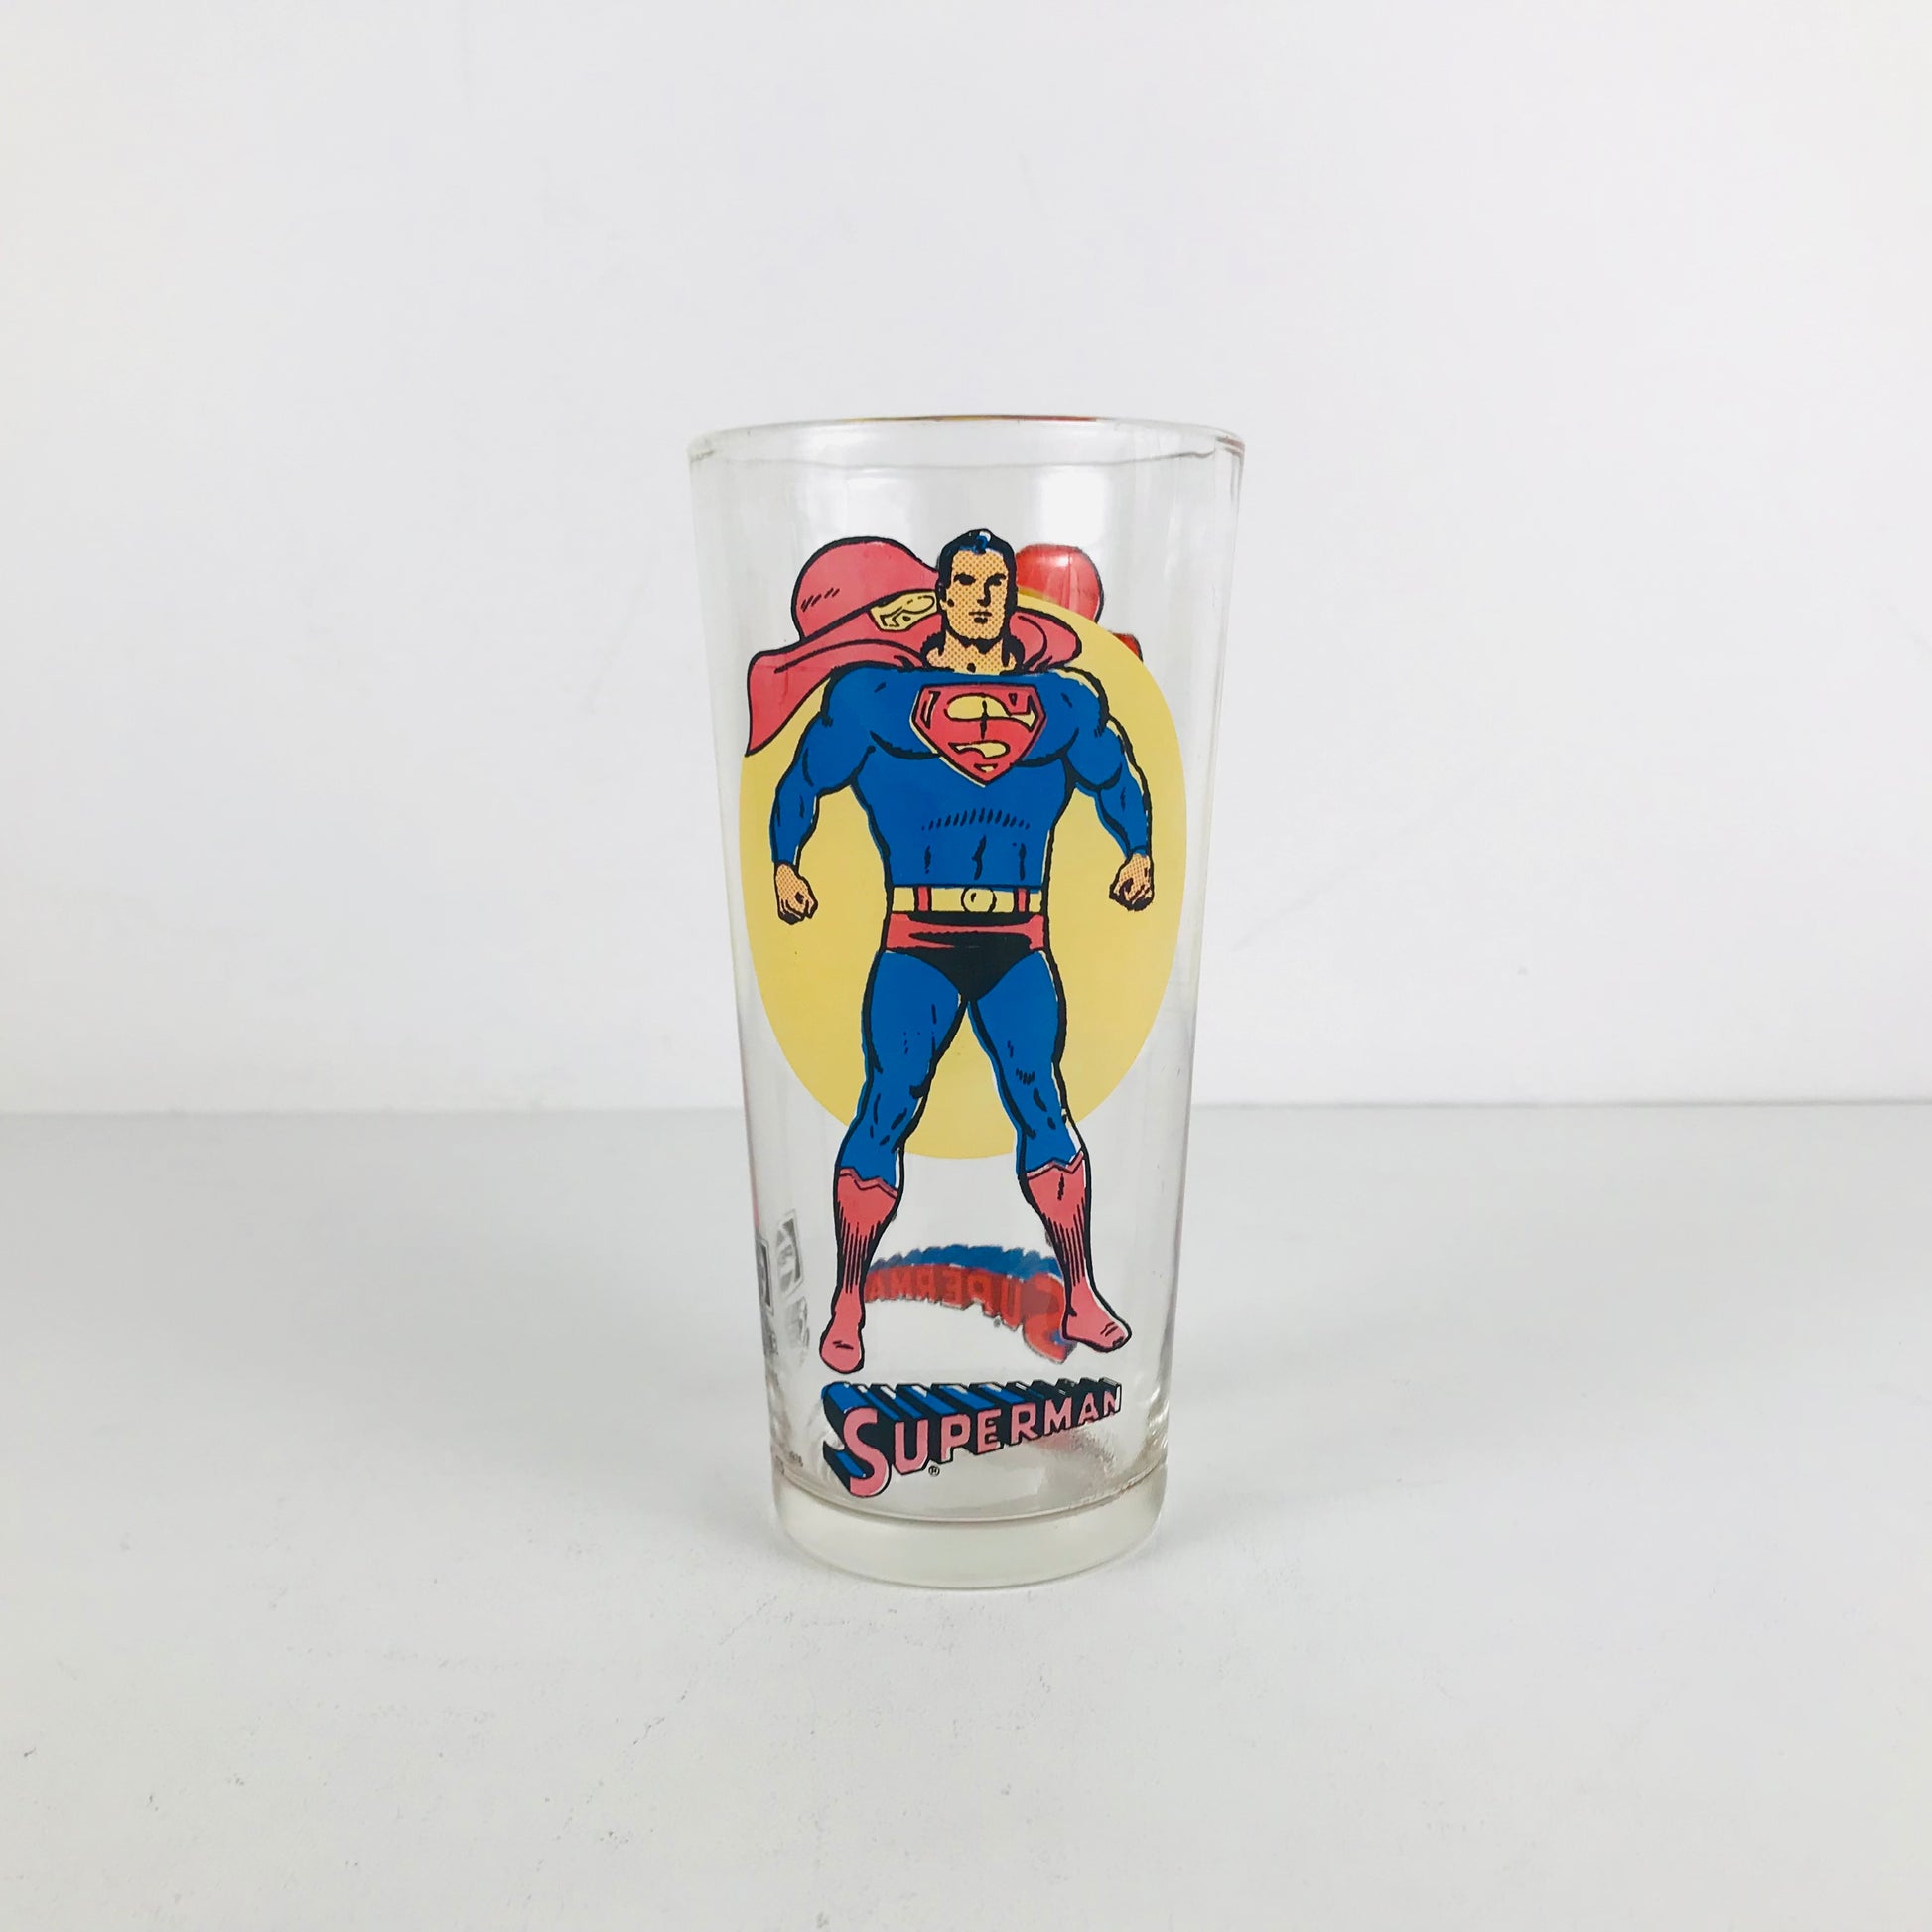 A 1970s Superman collectible glass tumbler showing an animated image of Superman